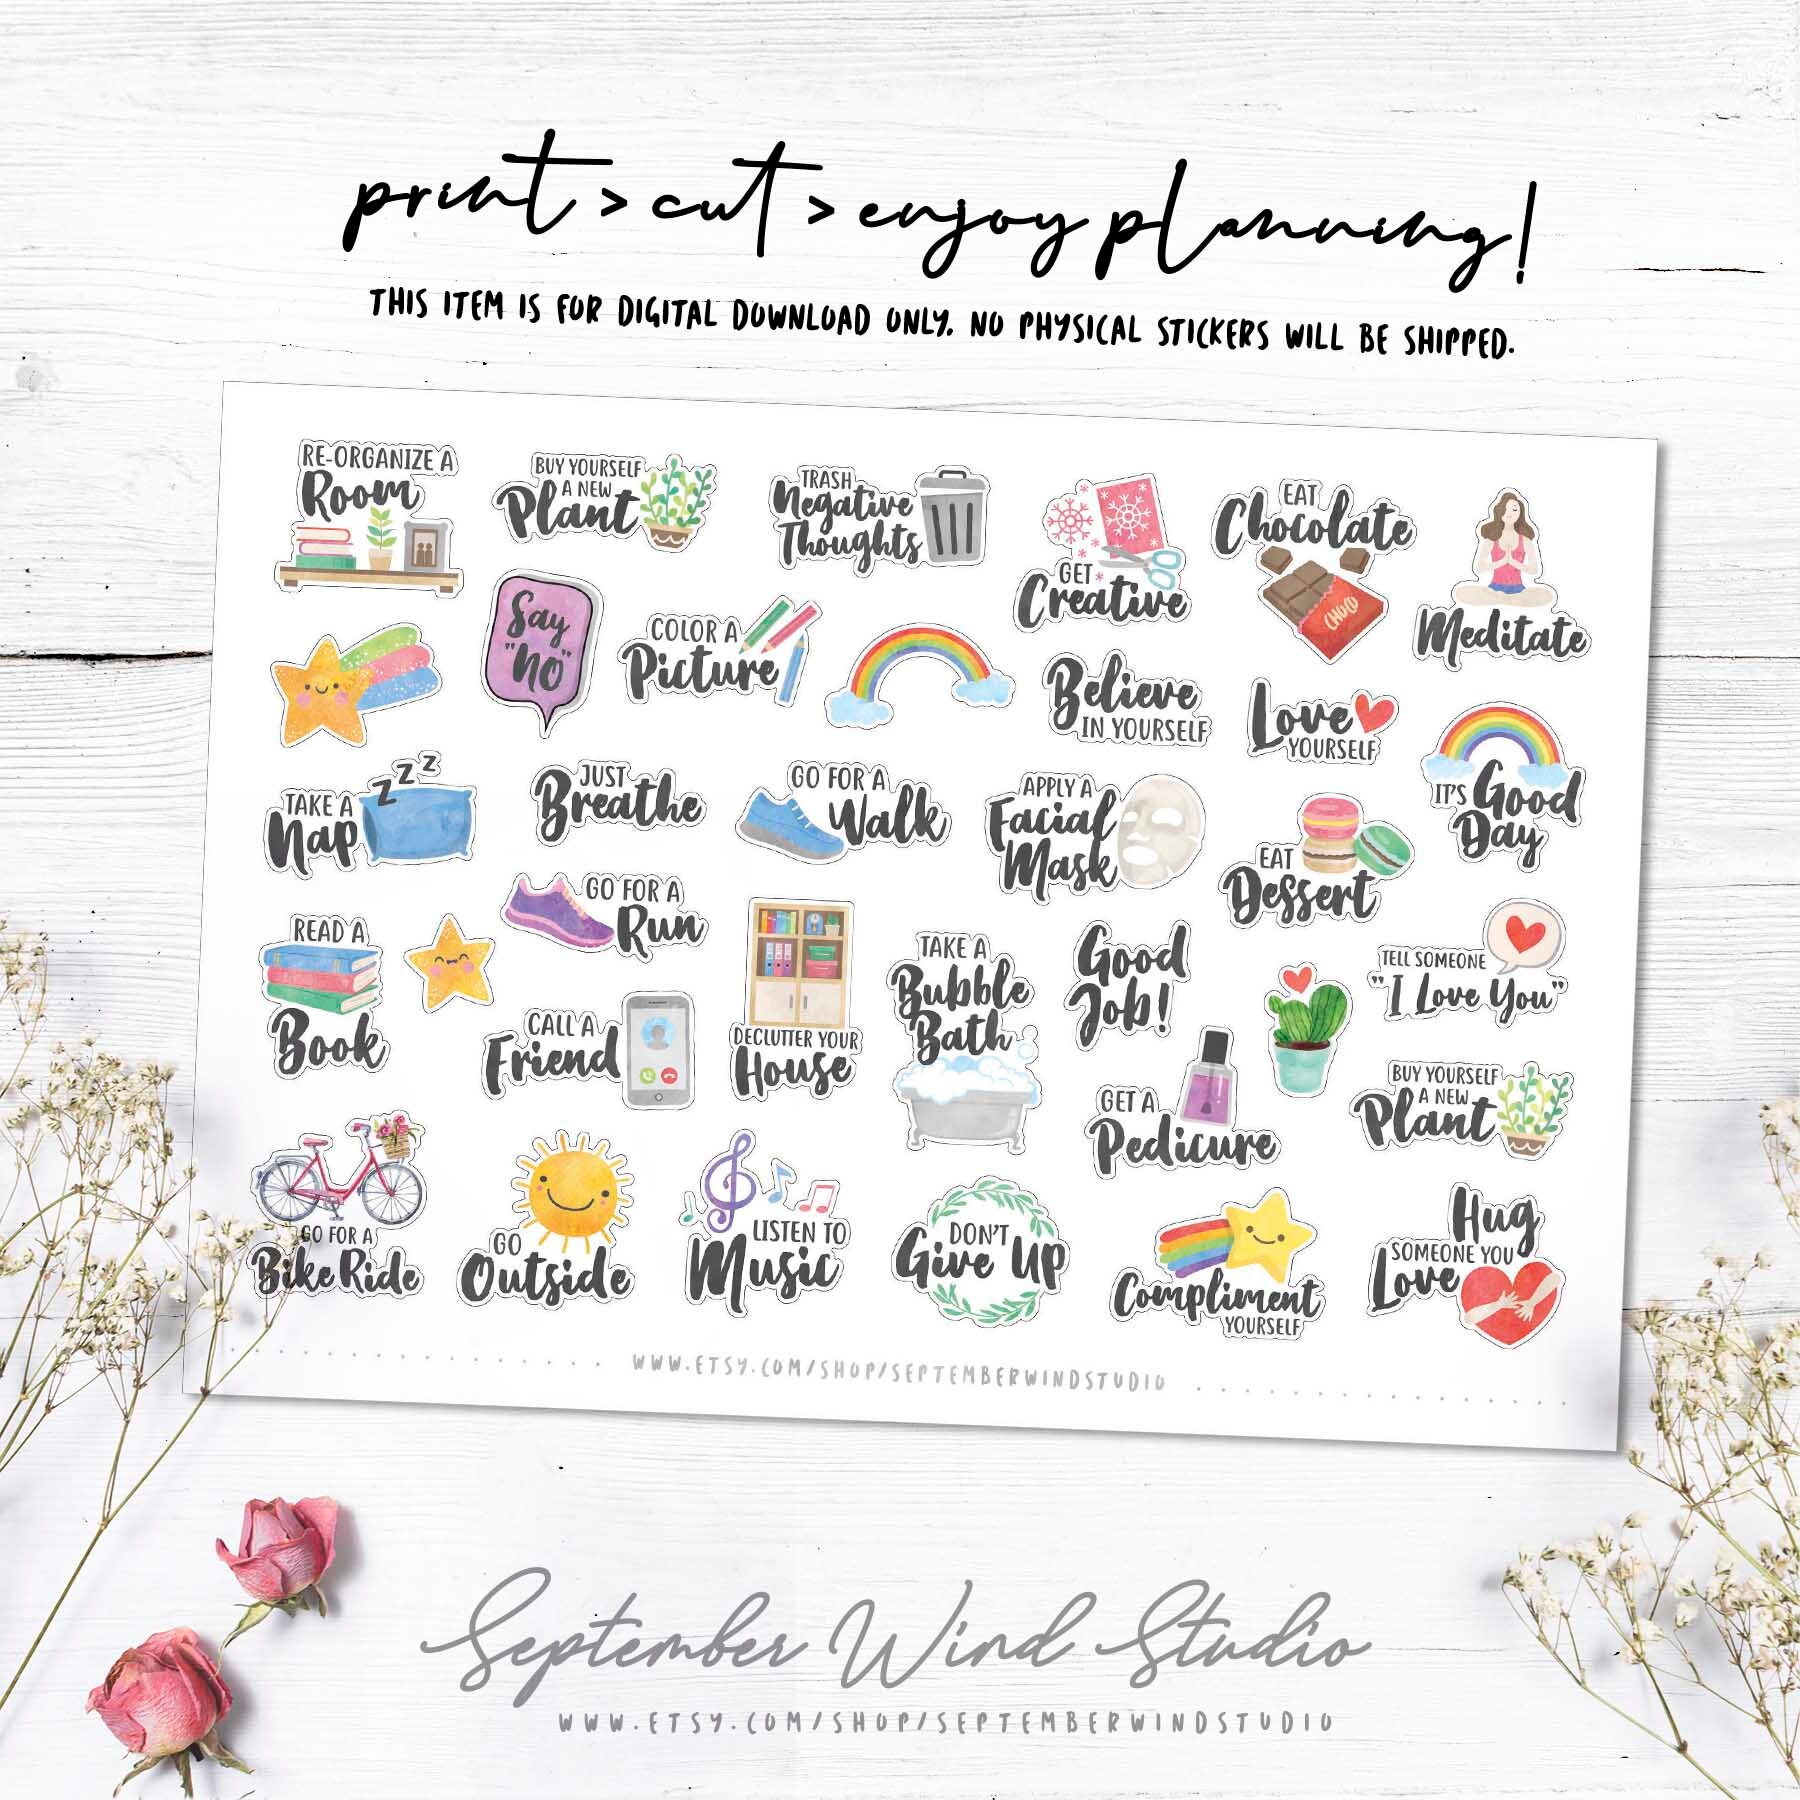  Nails Planner Appointment / 54 Fun Vinyl Stickers (1/2”) /  Manicure Salon Day/Beauty Self Care Me Time/Essential Productivity Life  Planner Stickers/Bullet Bujo Journal (Matte Vinyl, 1 Sheet) : Handmade  Products